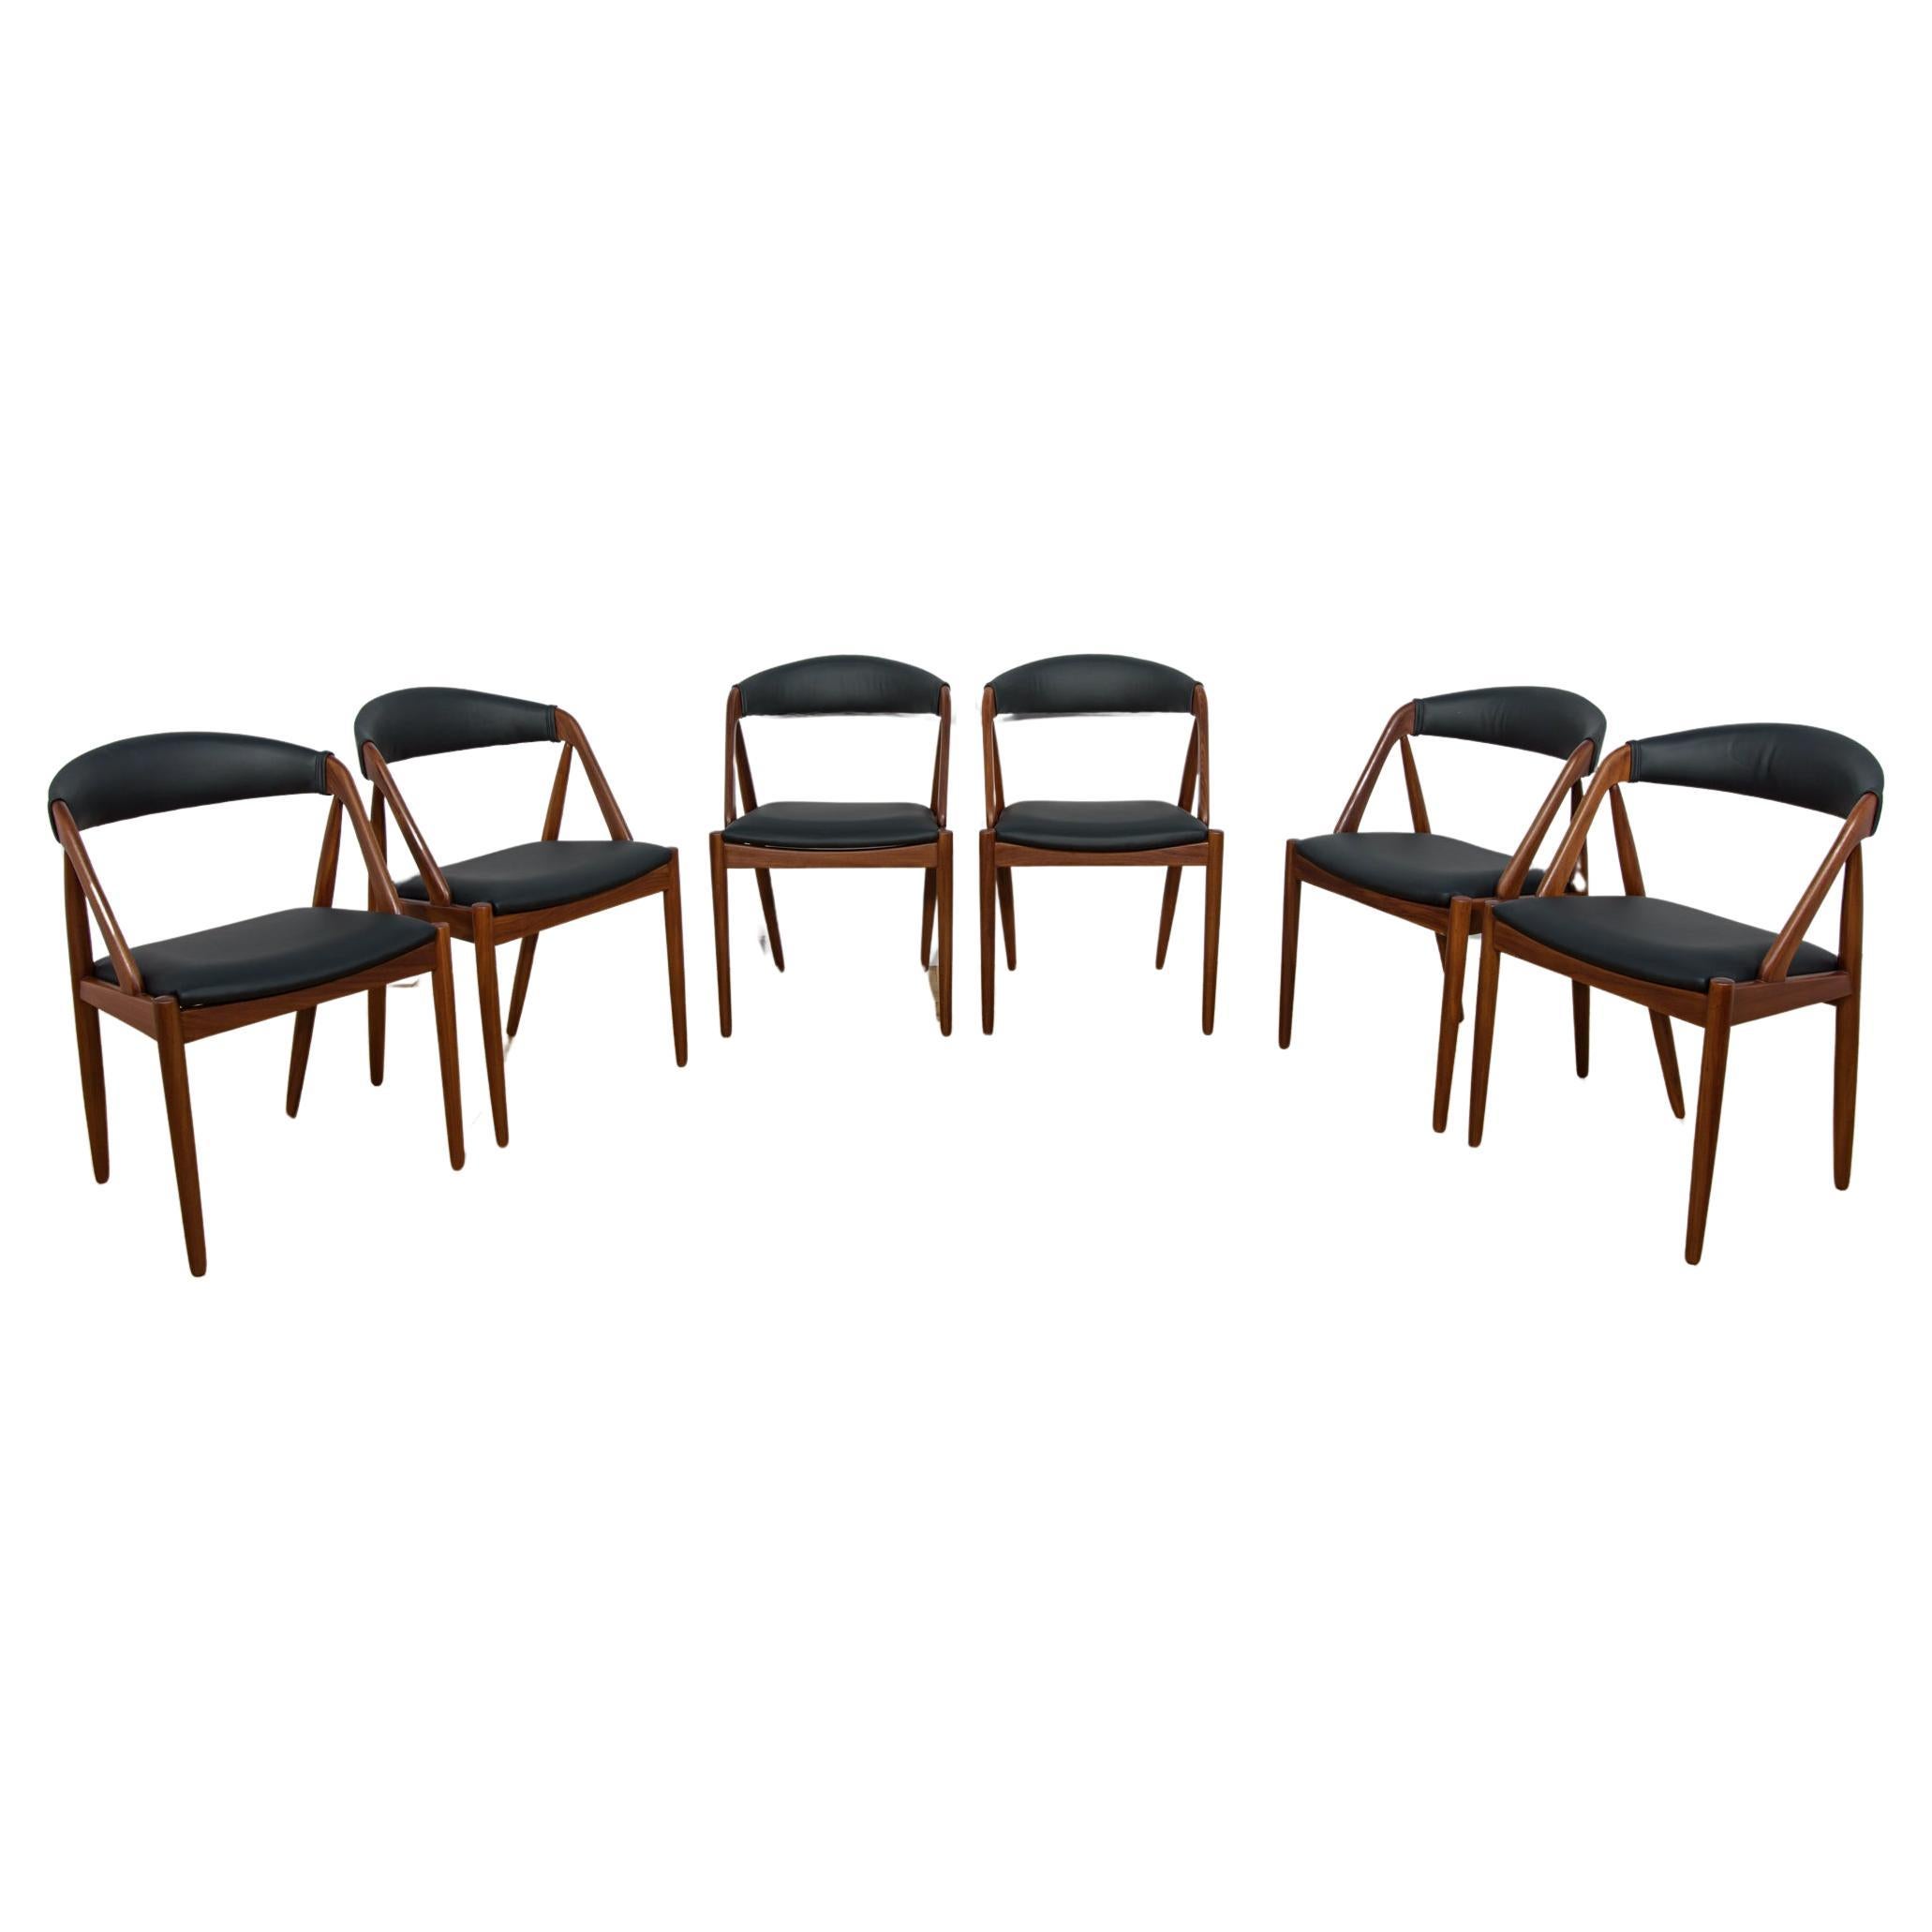 Model 31 Dining Chairs by Kai Kristiansen for Schou Andersen, Denmark, 1960s. For Sale